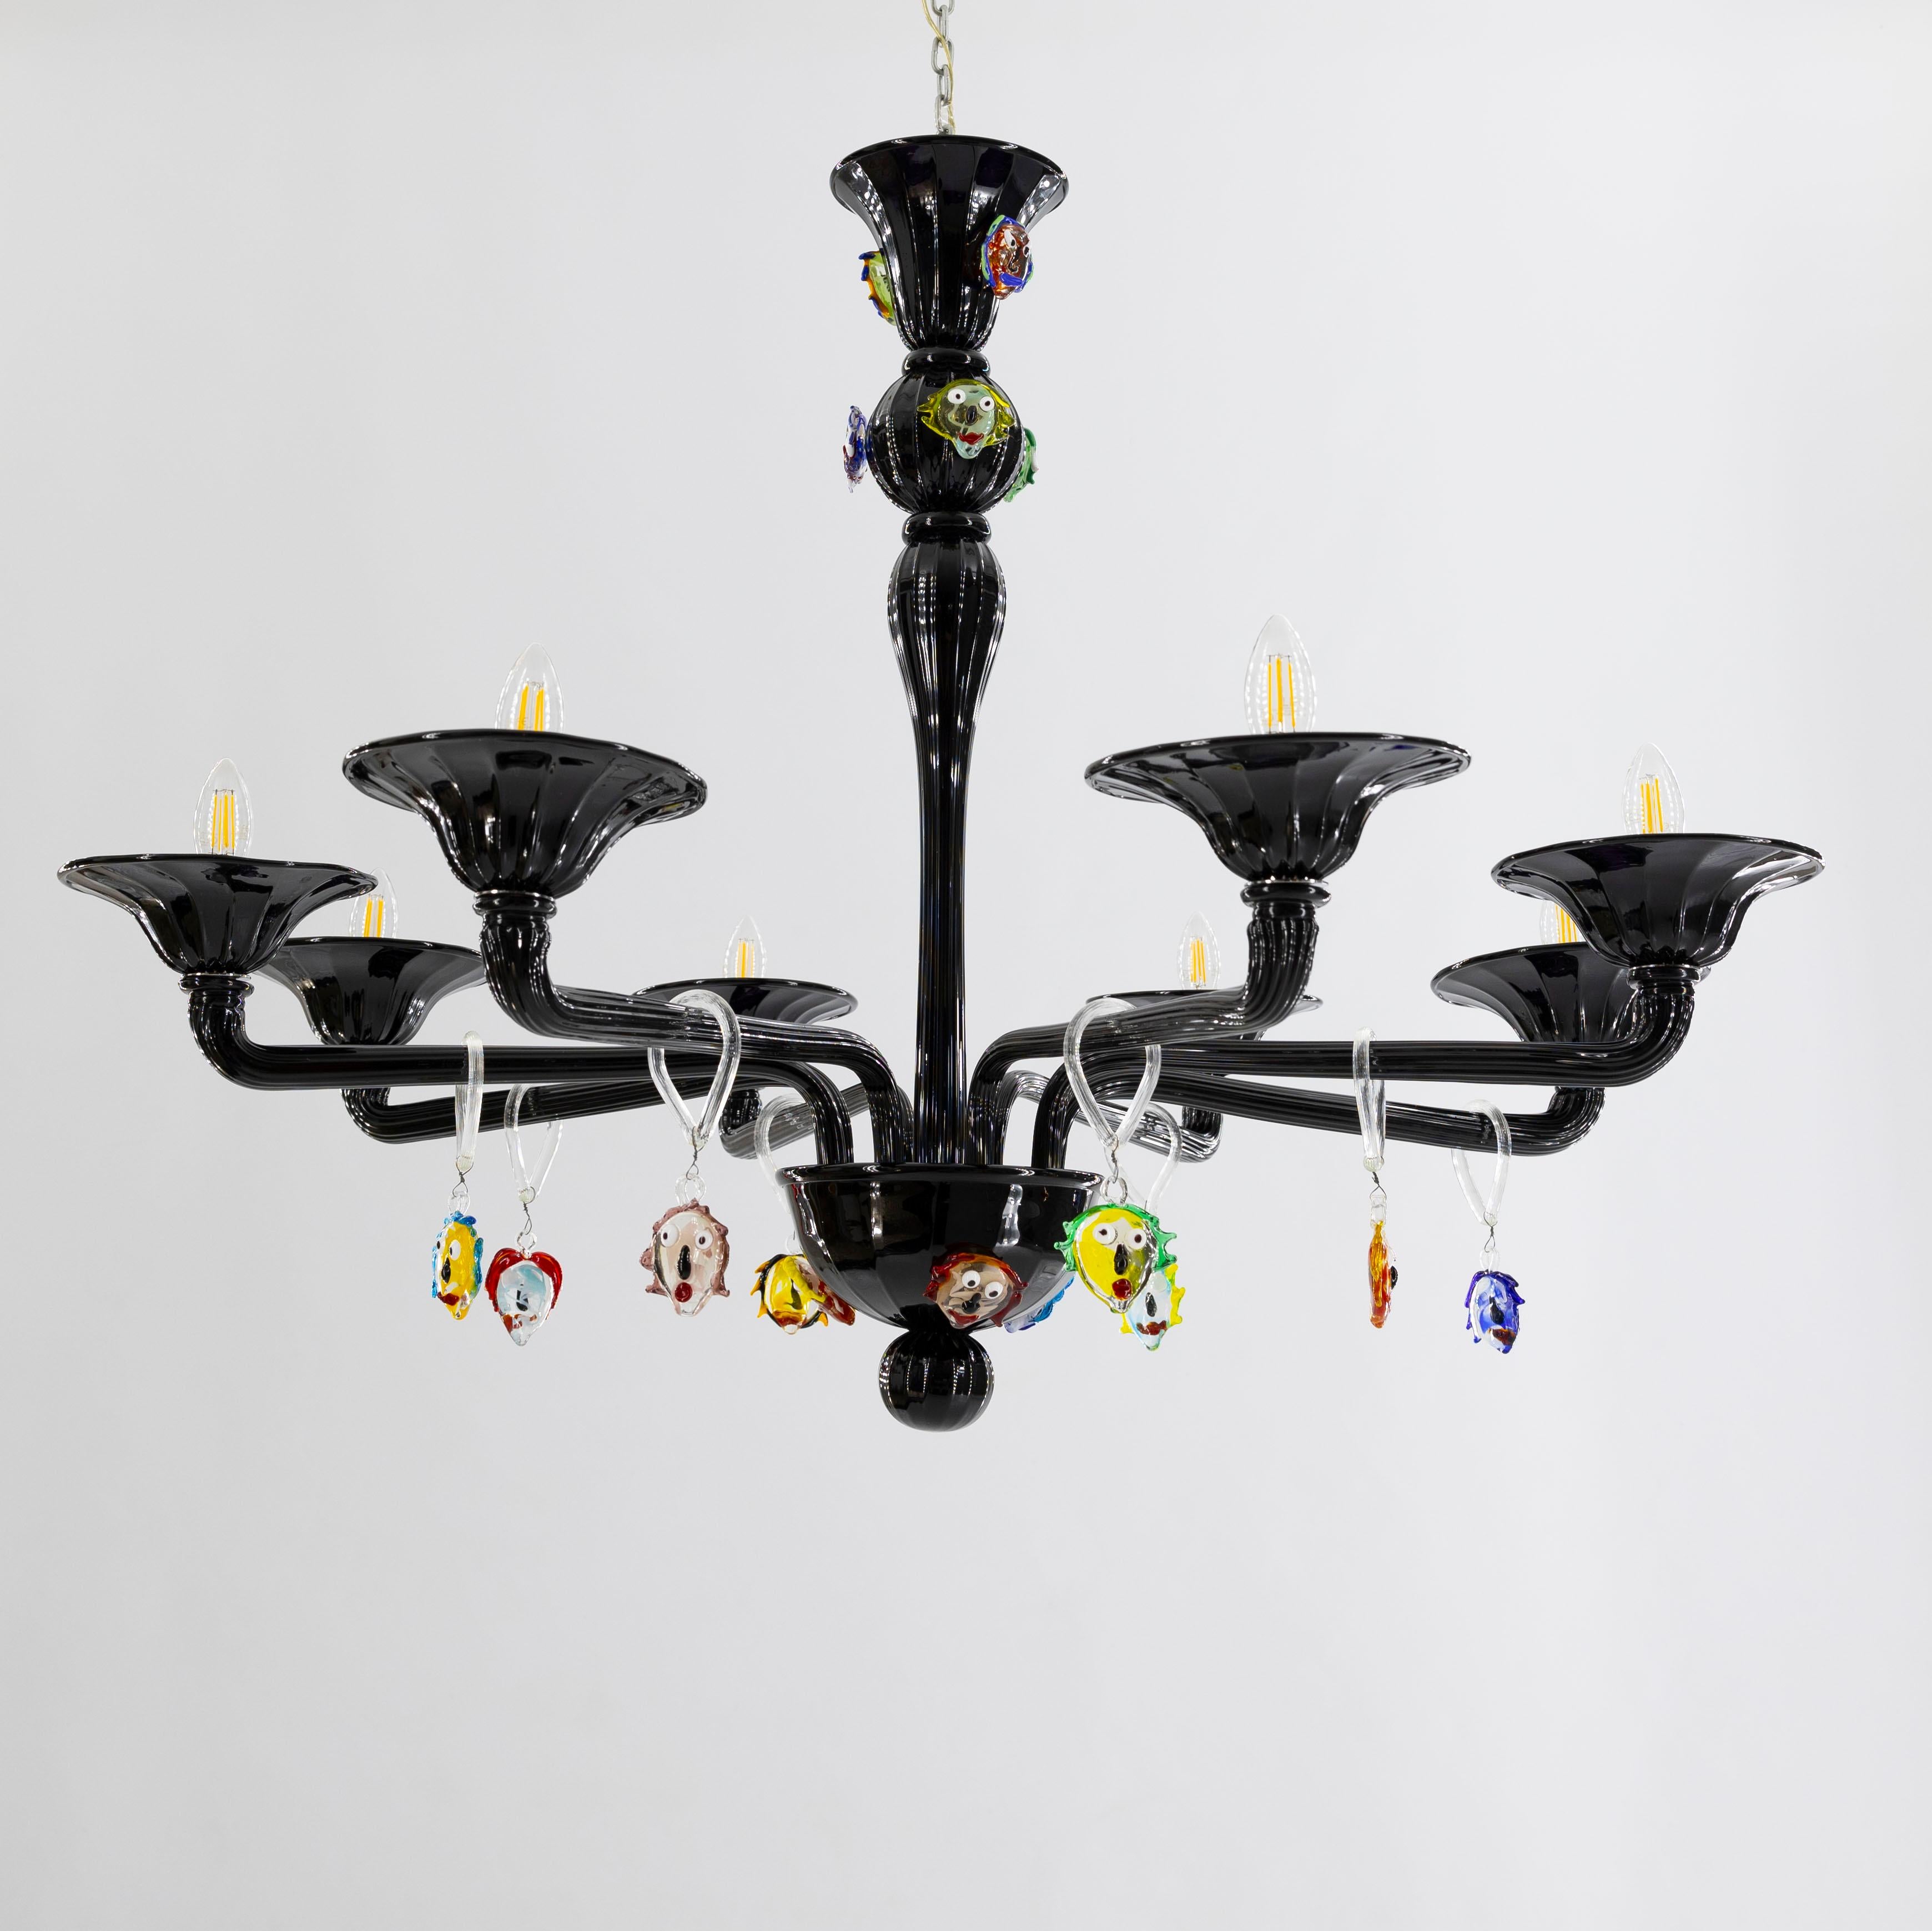 Modern Black Pair of Chandeliers Picasso sculpture in blown Murano Glass, Italy.
This is a fantastic chandelier entirely handcrafted in blown Murano glass, total black in each part, and decorated by 